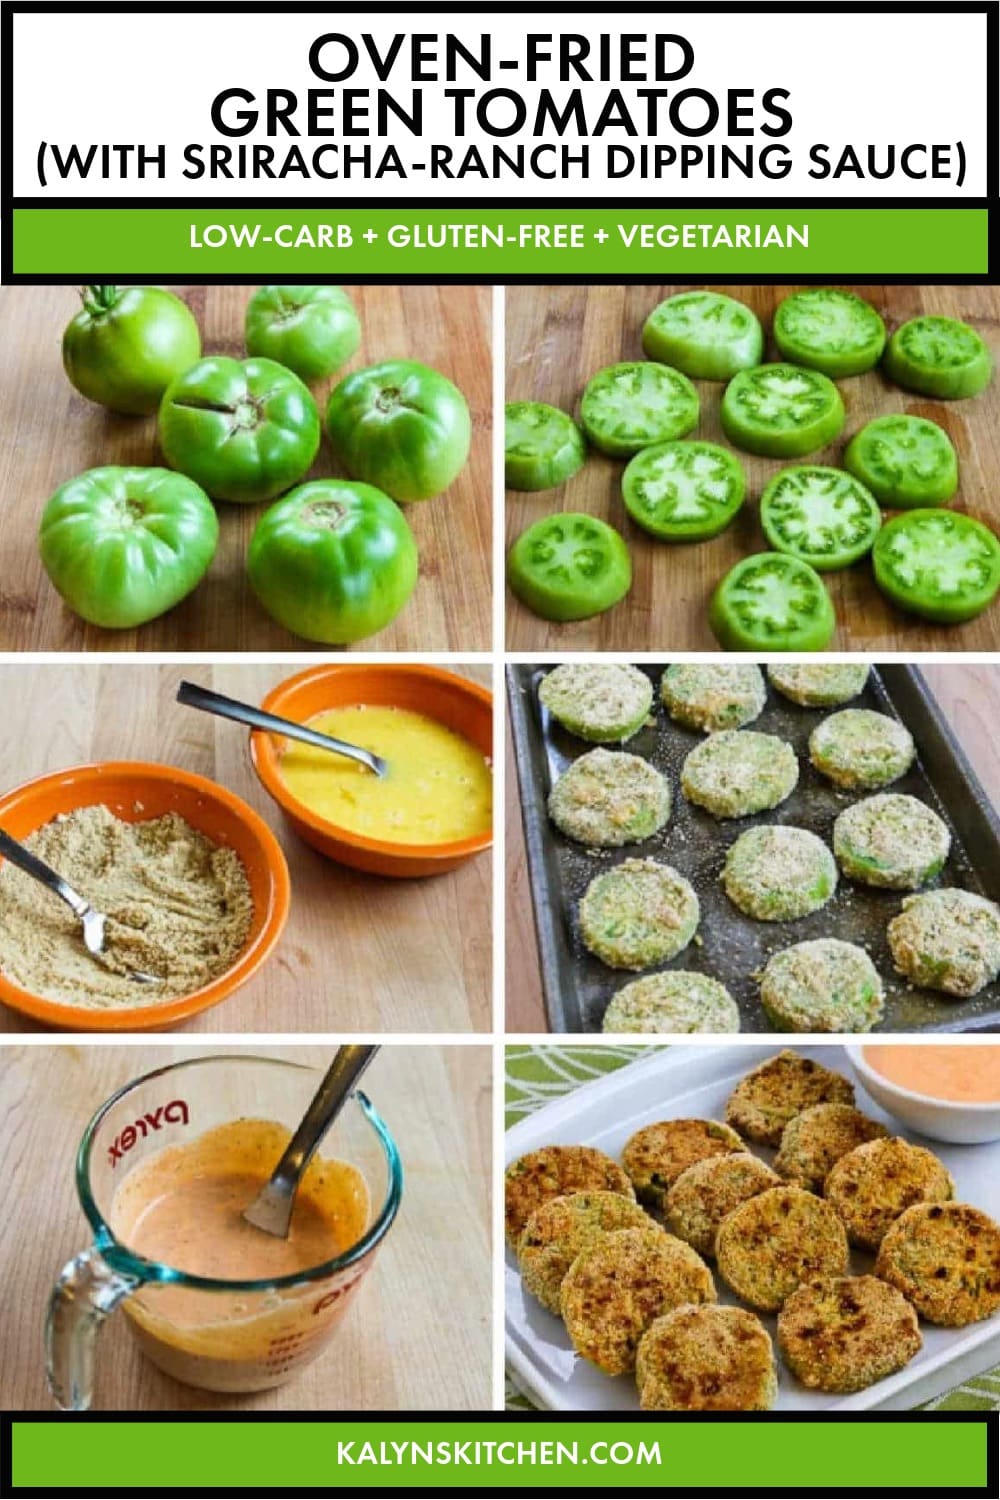 Pinterest image of Oven-Fried Green Tomatoes (with Sriracha-Ranch Dipping Sauce)